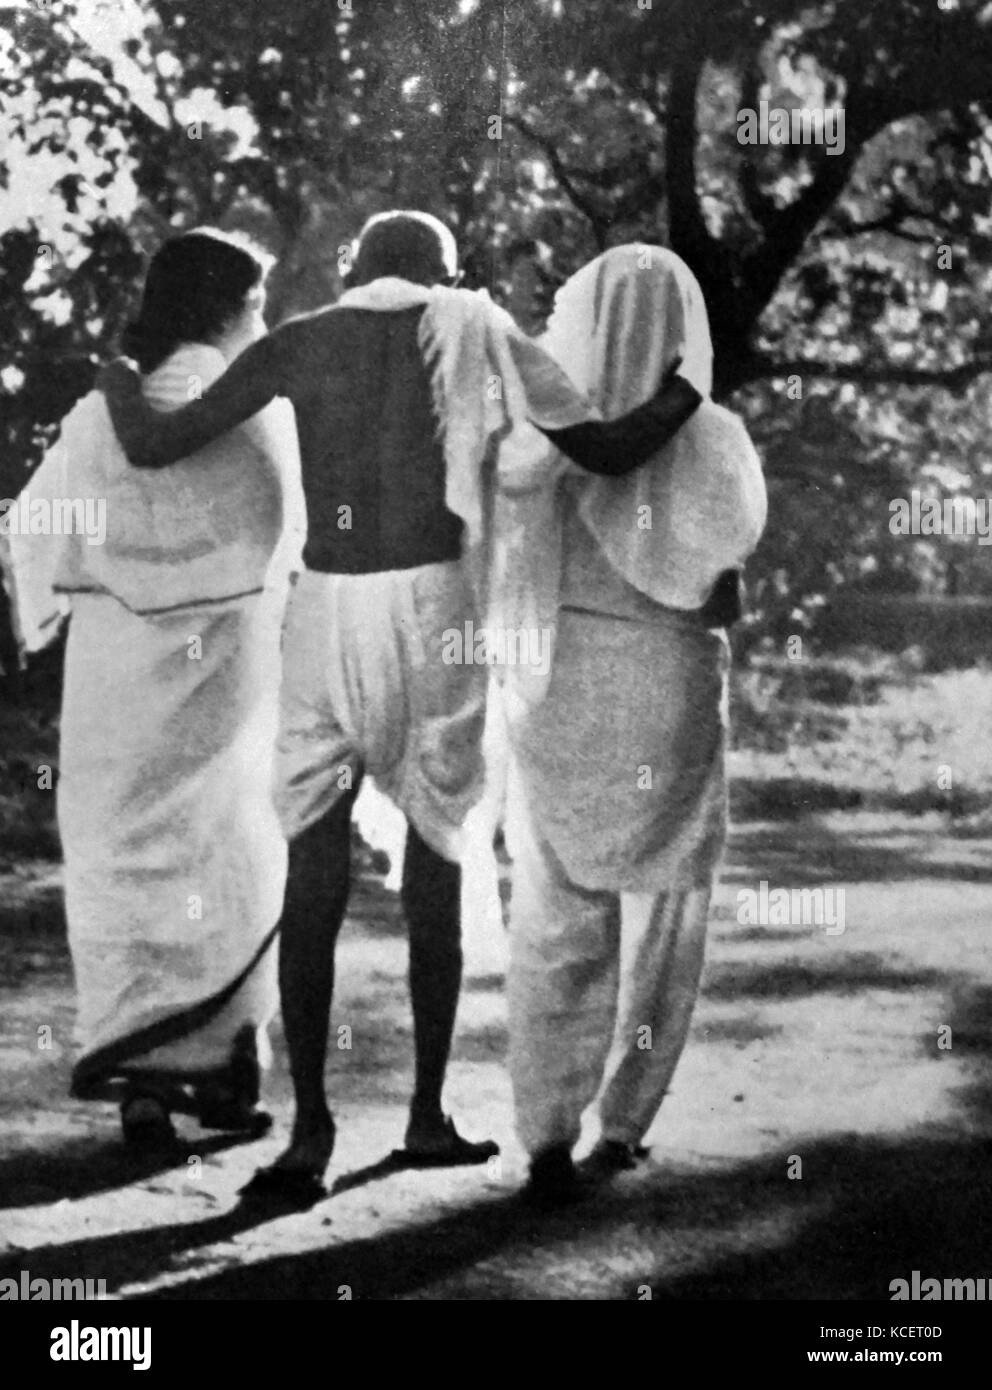 Mohandas Karamchand Gandhi with his nieces walking in a garden 1948. Gandhi (2 October 1869 – 30 January 1948), was the preeminent leader of the Indian independence movement in British-ruled India. Stock Photo